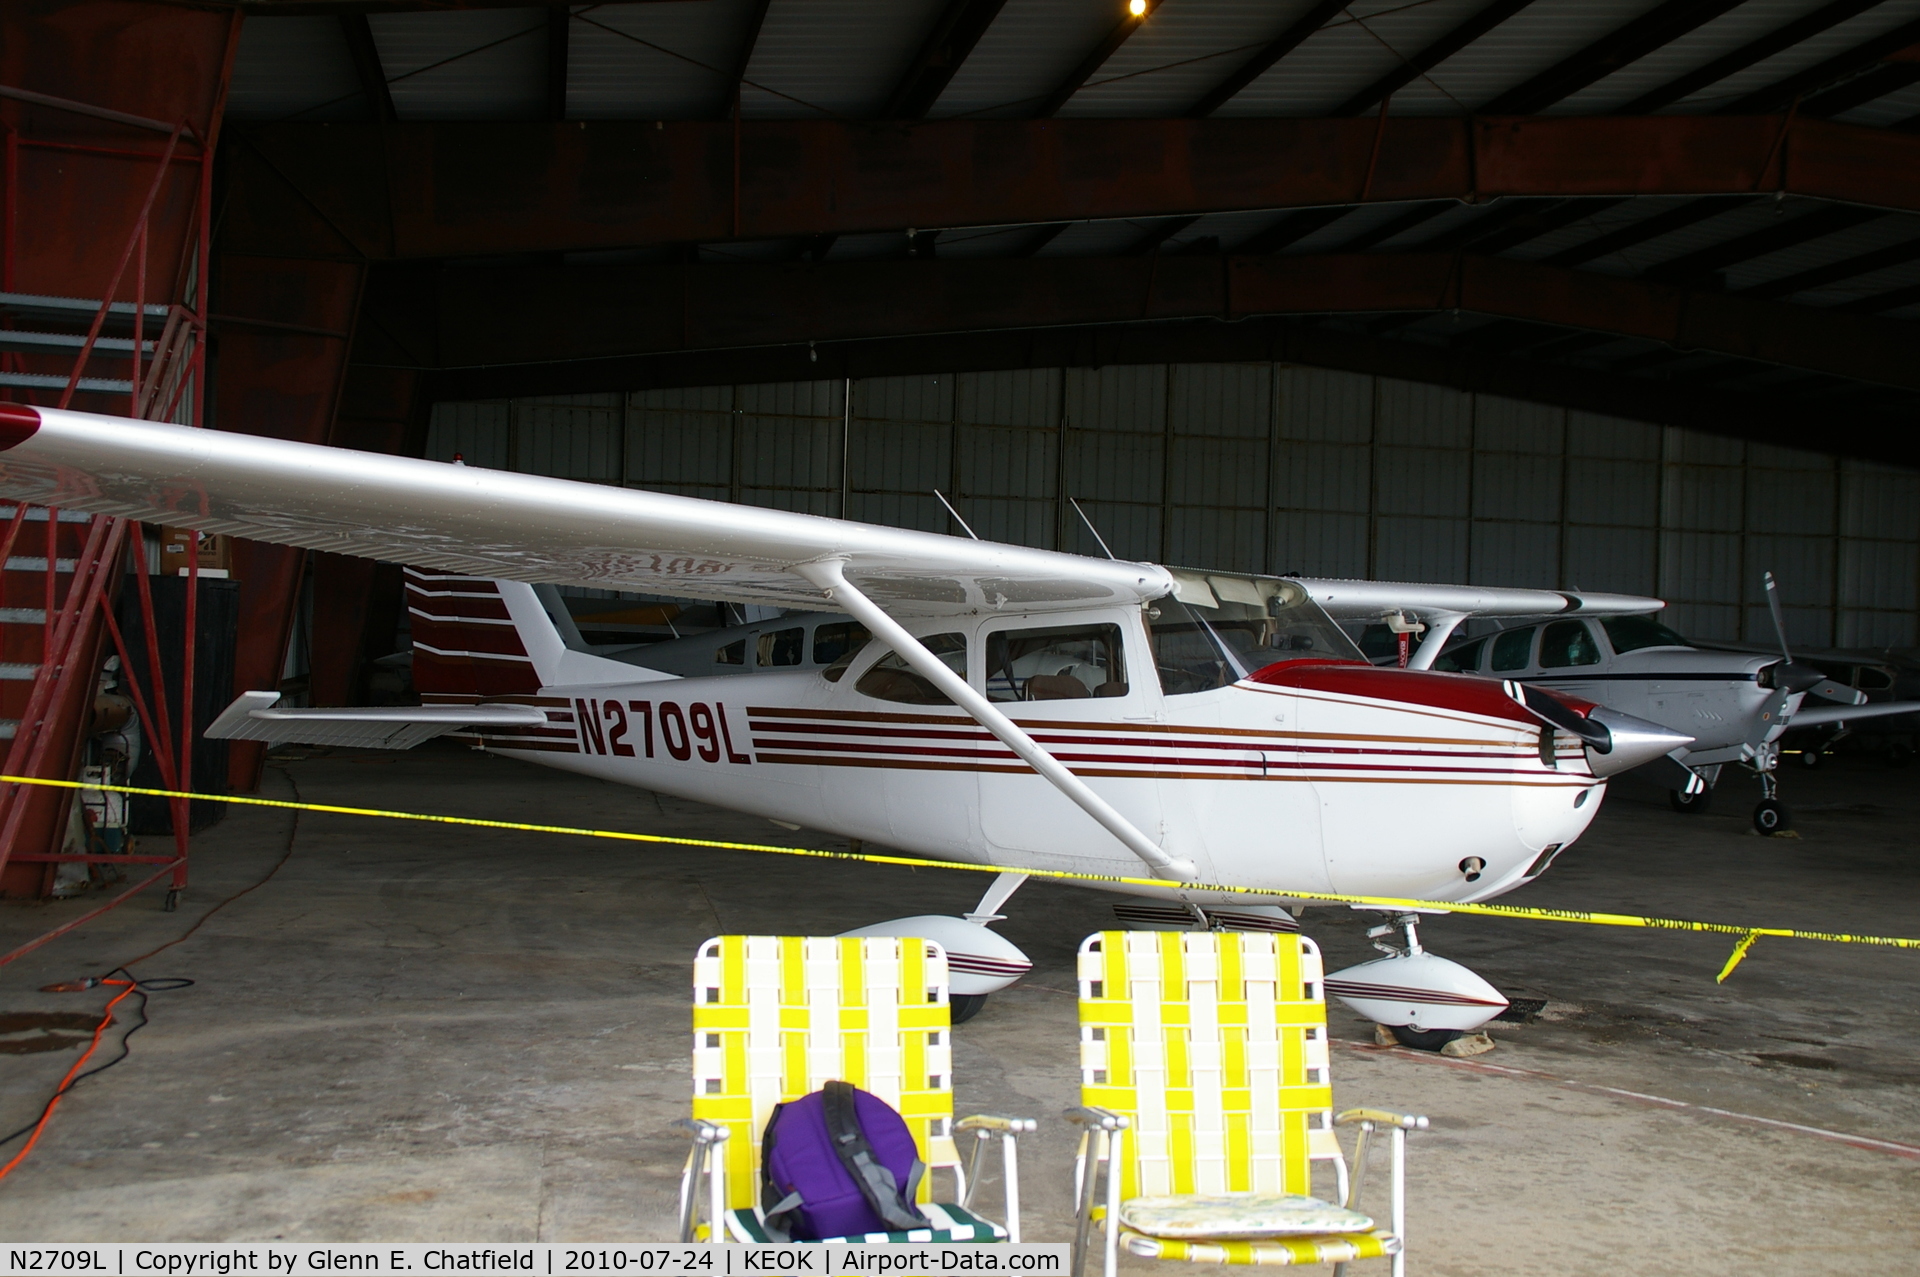 N2709L, 1967 Cessna 172H C/N 17255909, Parked in the hangar for the fly in